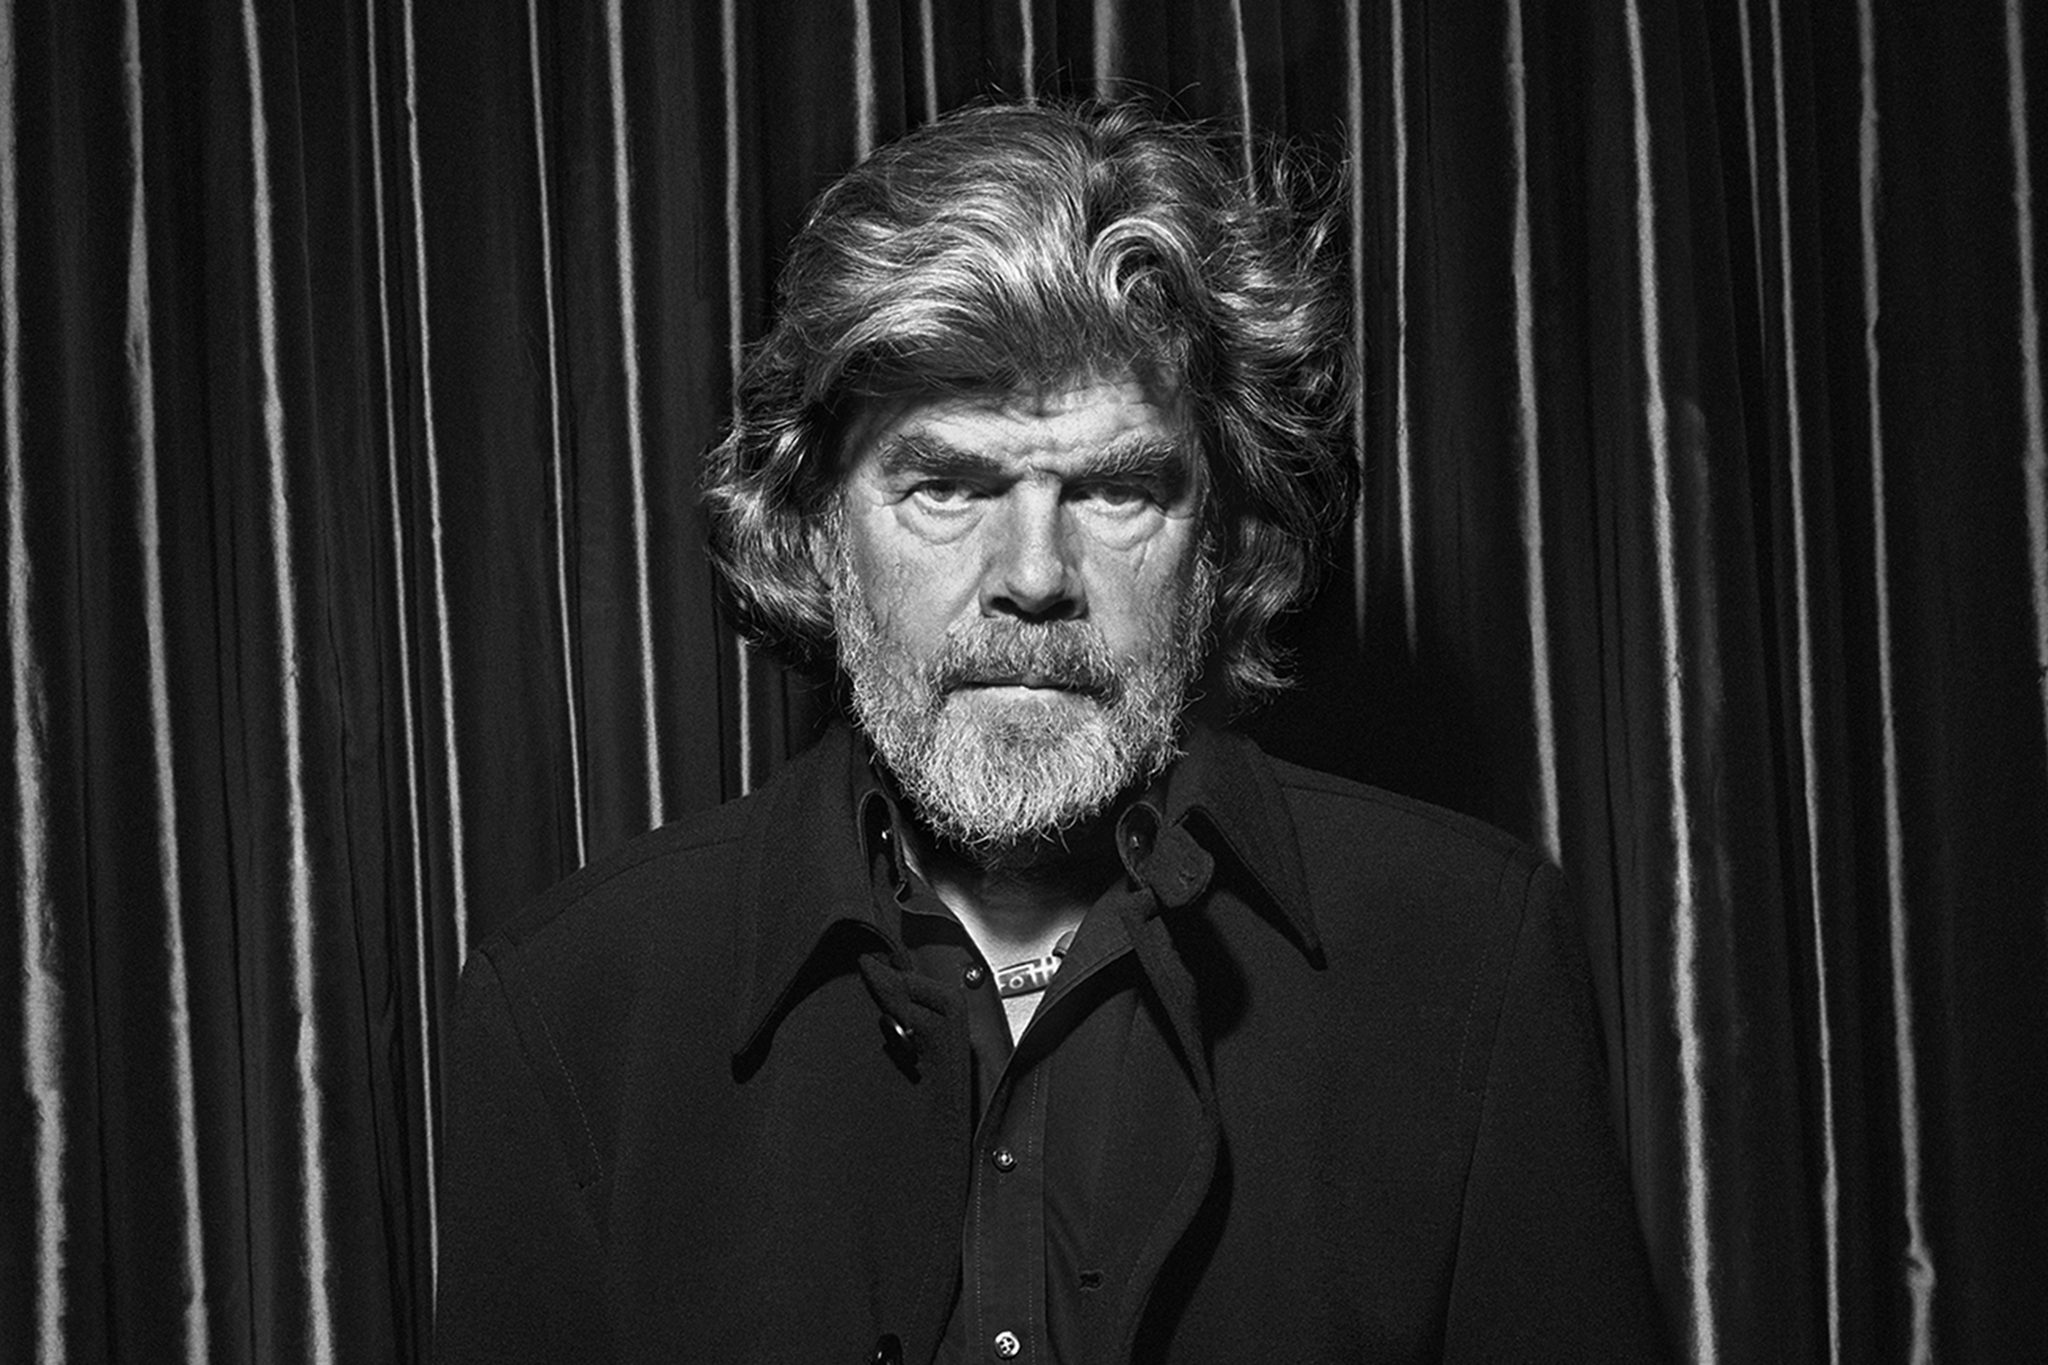 Reinhold Messner has been described as charming and flamboyant, arrogant and egotistical. An enigma